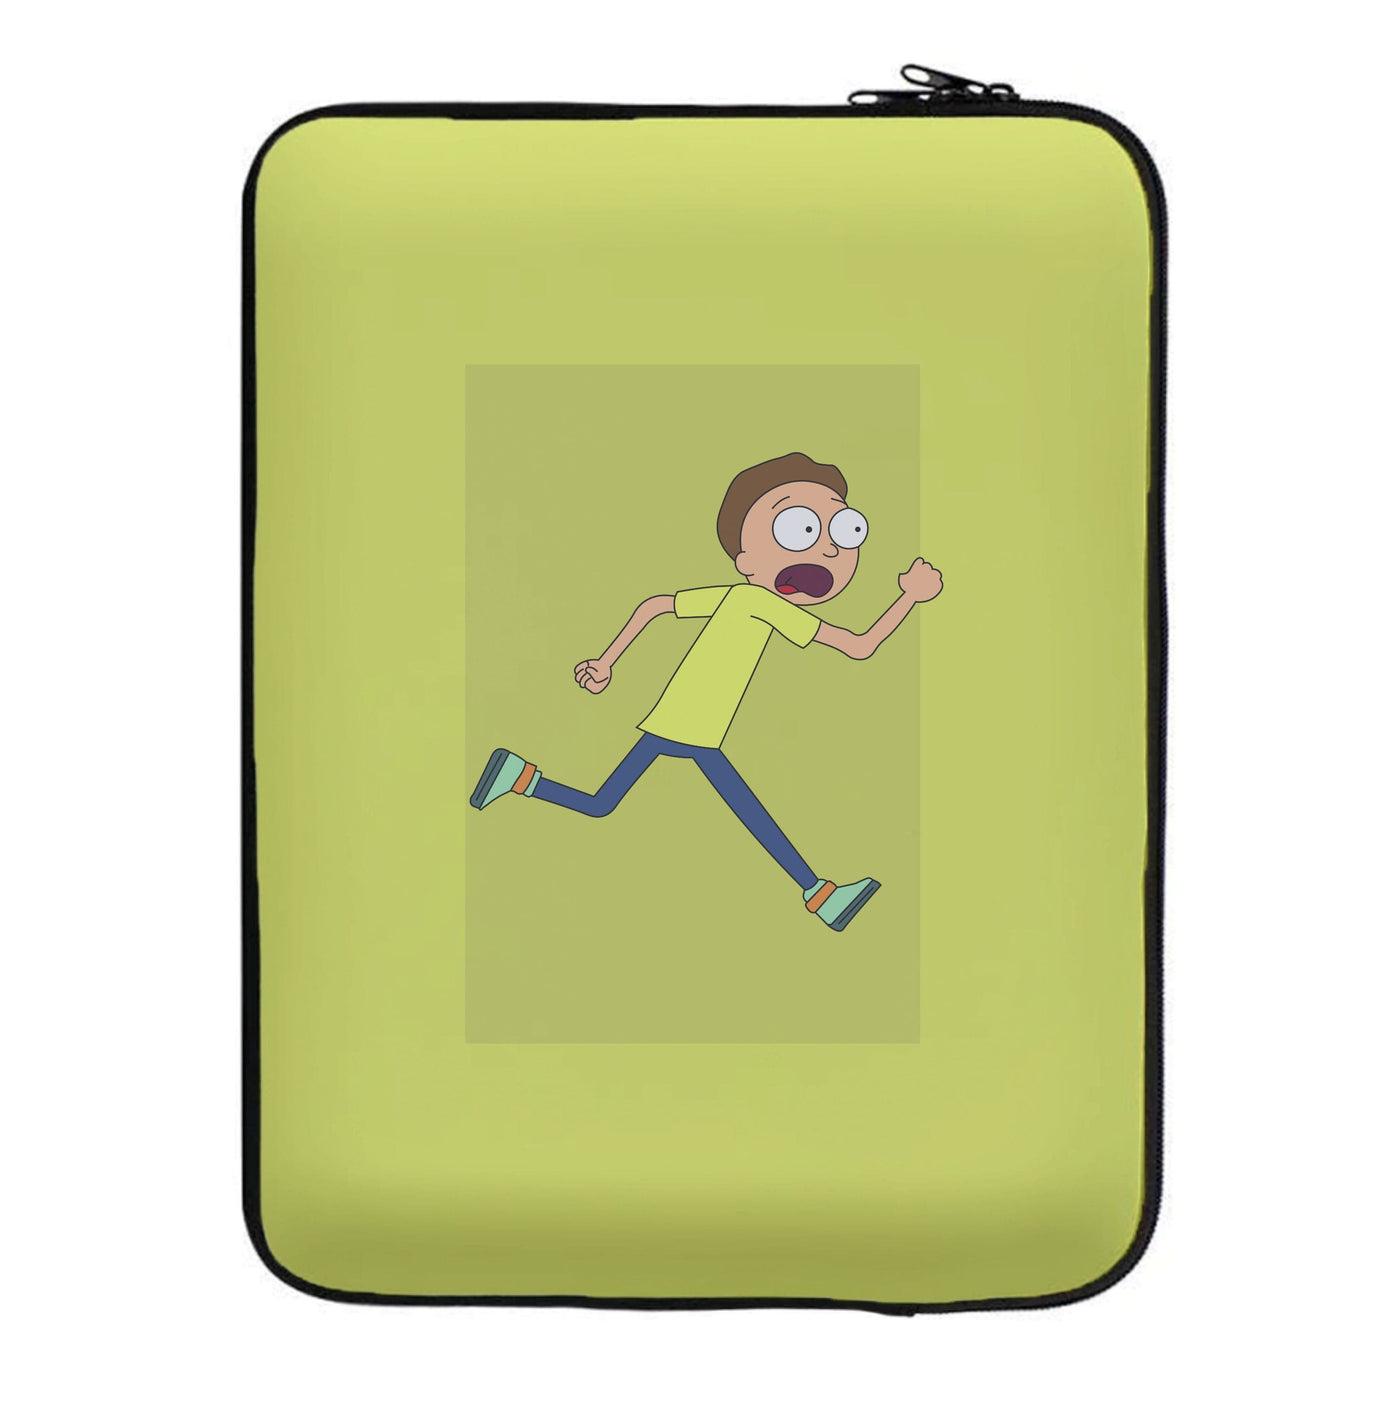 Morty - Rick And Morty Laptop Sleeve